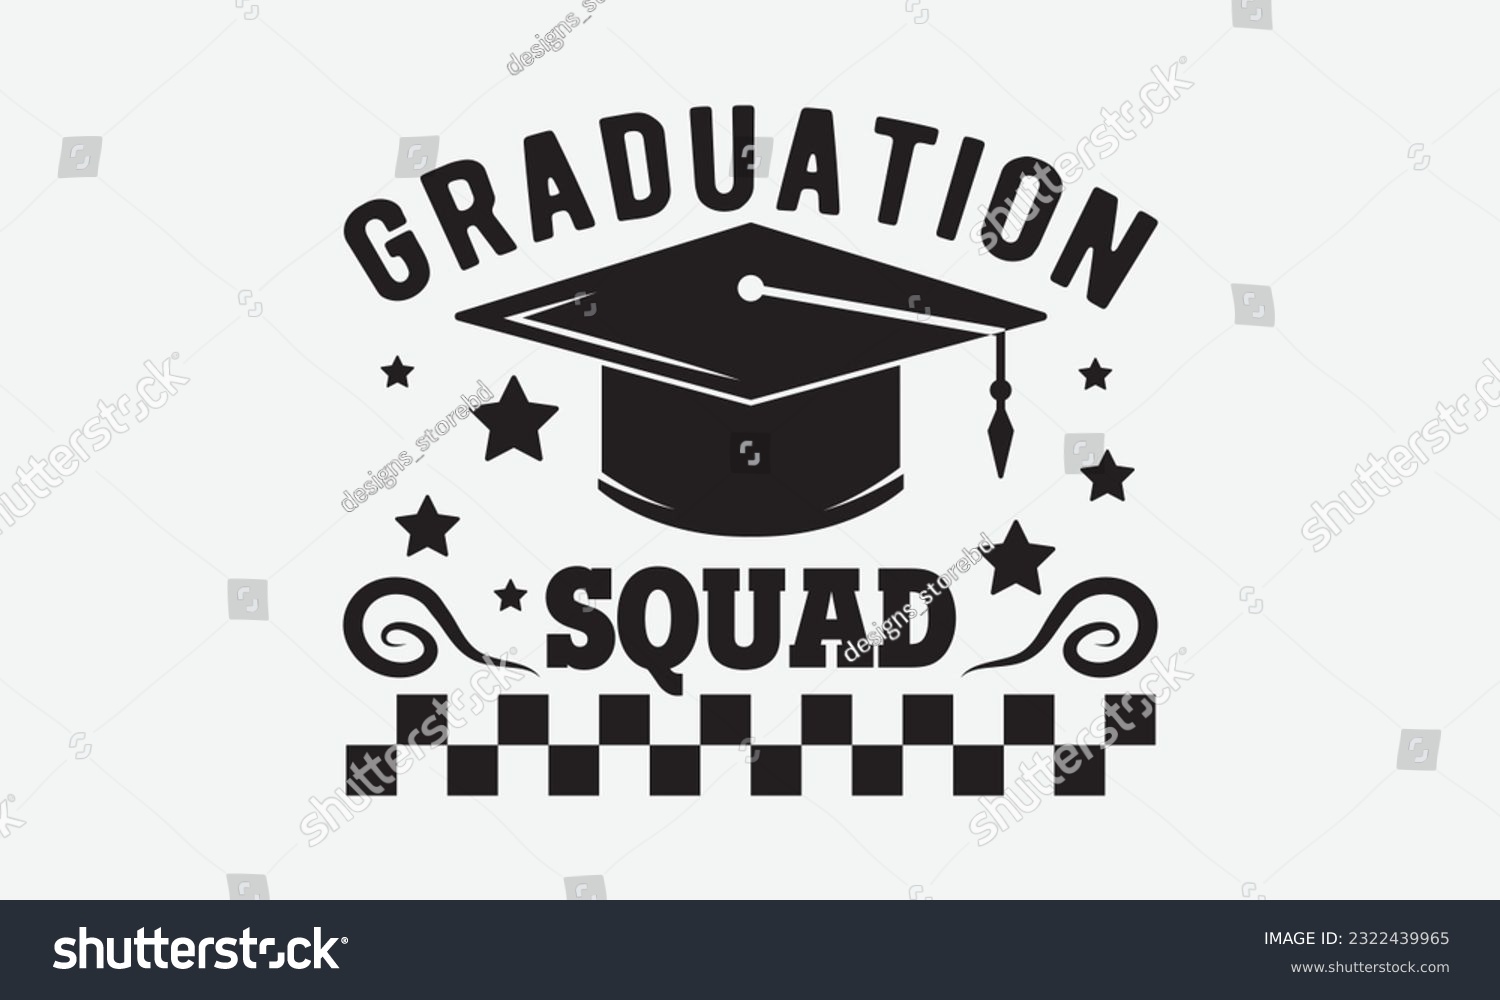 SVG of Graduation squad svg, Graduation SVG , Class of 2023 Graduation SVG Bundle, Graduation cap svg, T shirt Calligraphy phrase for Christmas, Hand drawn lettering for Xmas greetings cards, invitations svg